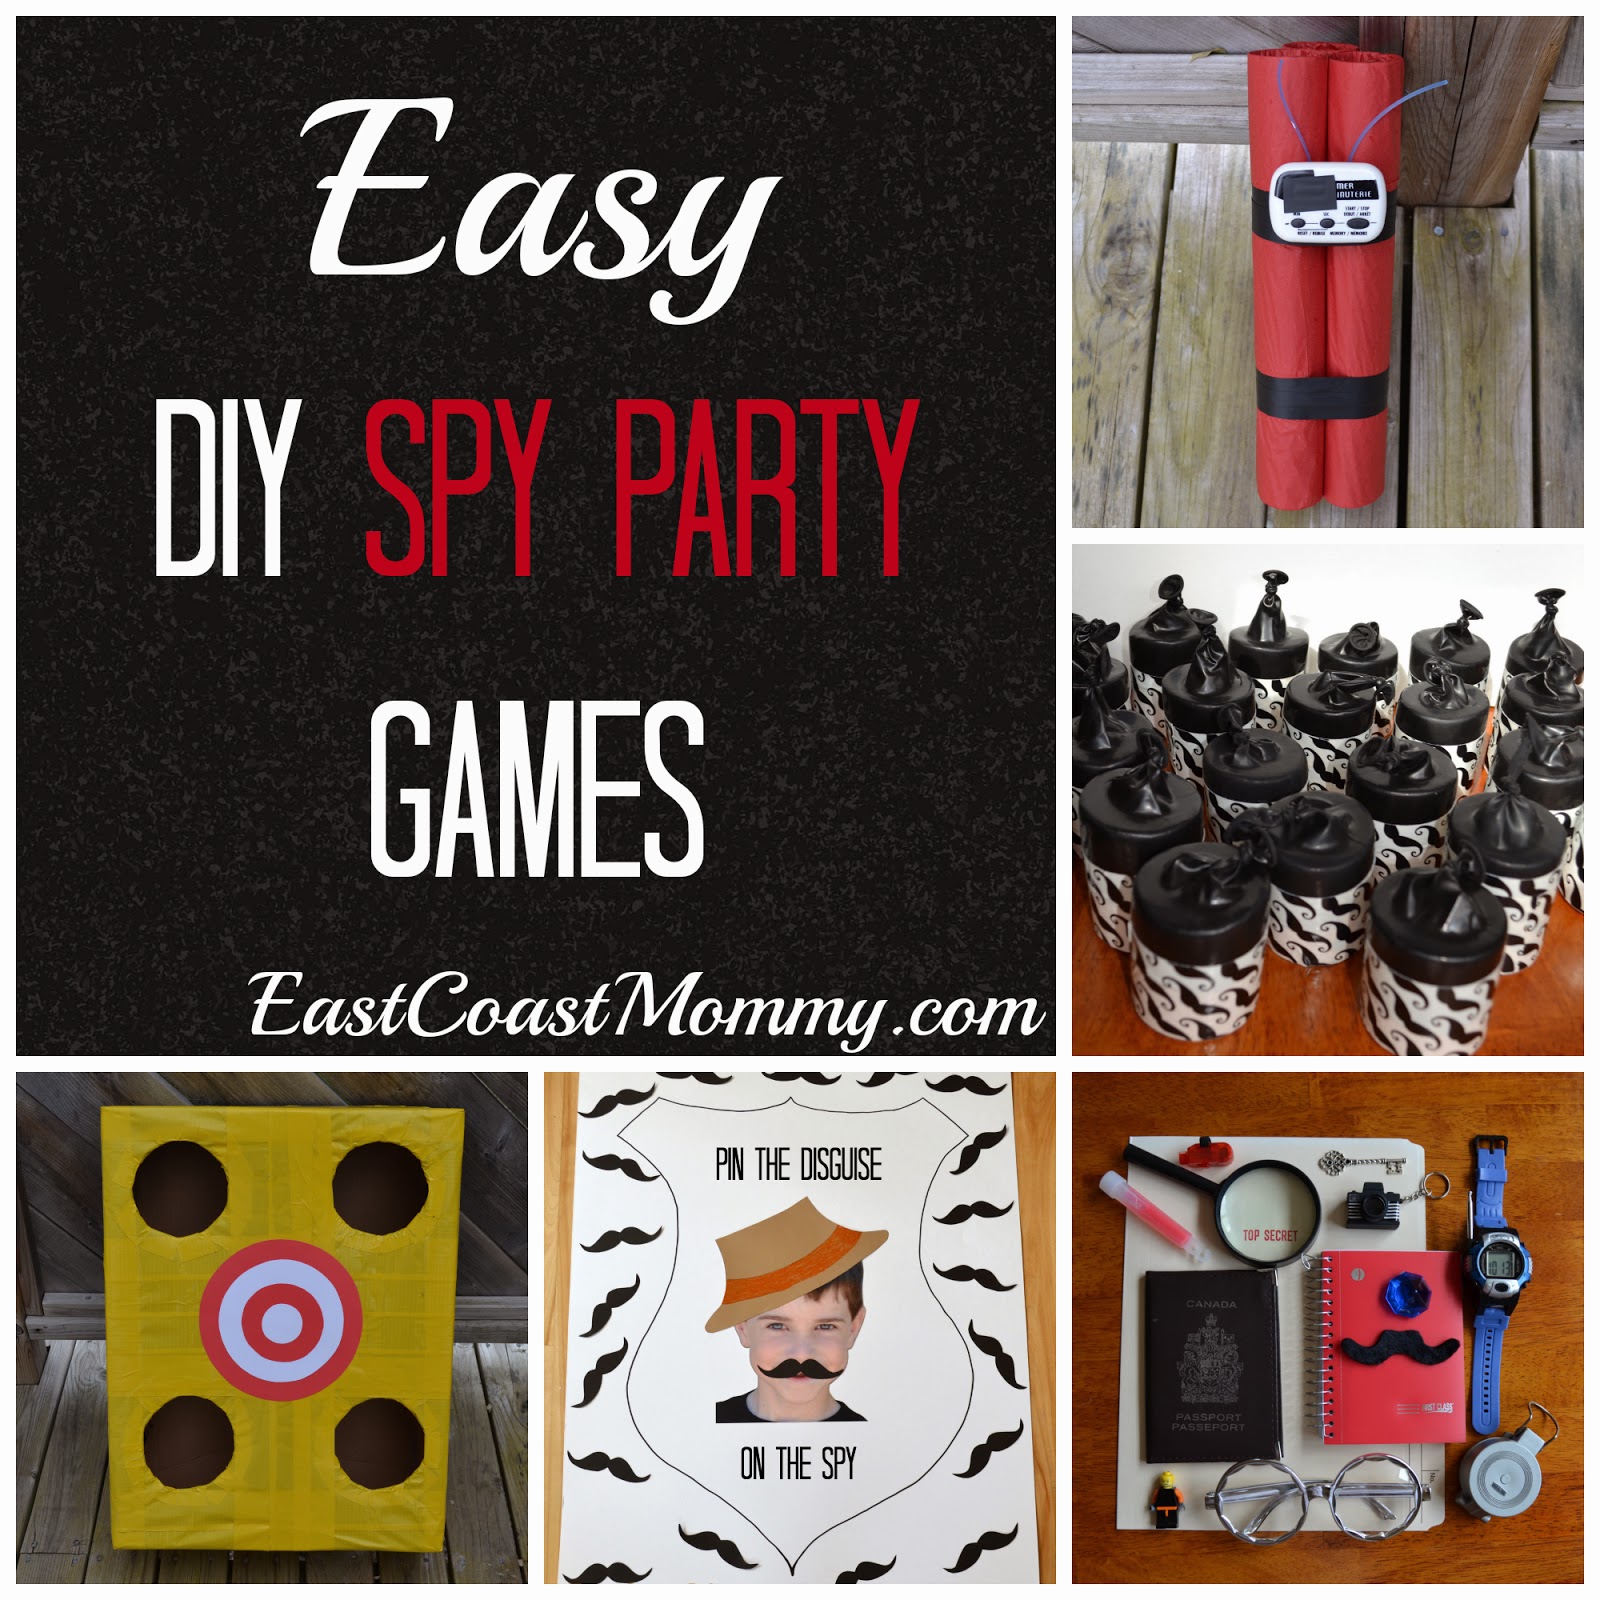 East Coast Mommy: DIY Spy Party - 5 easy and inexpensive games